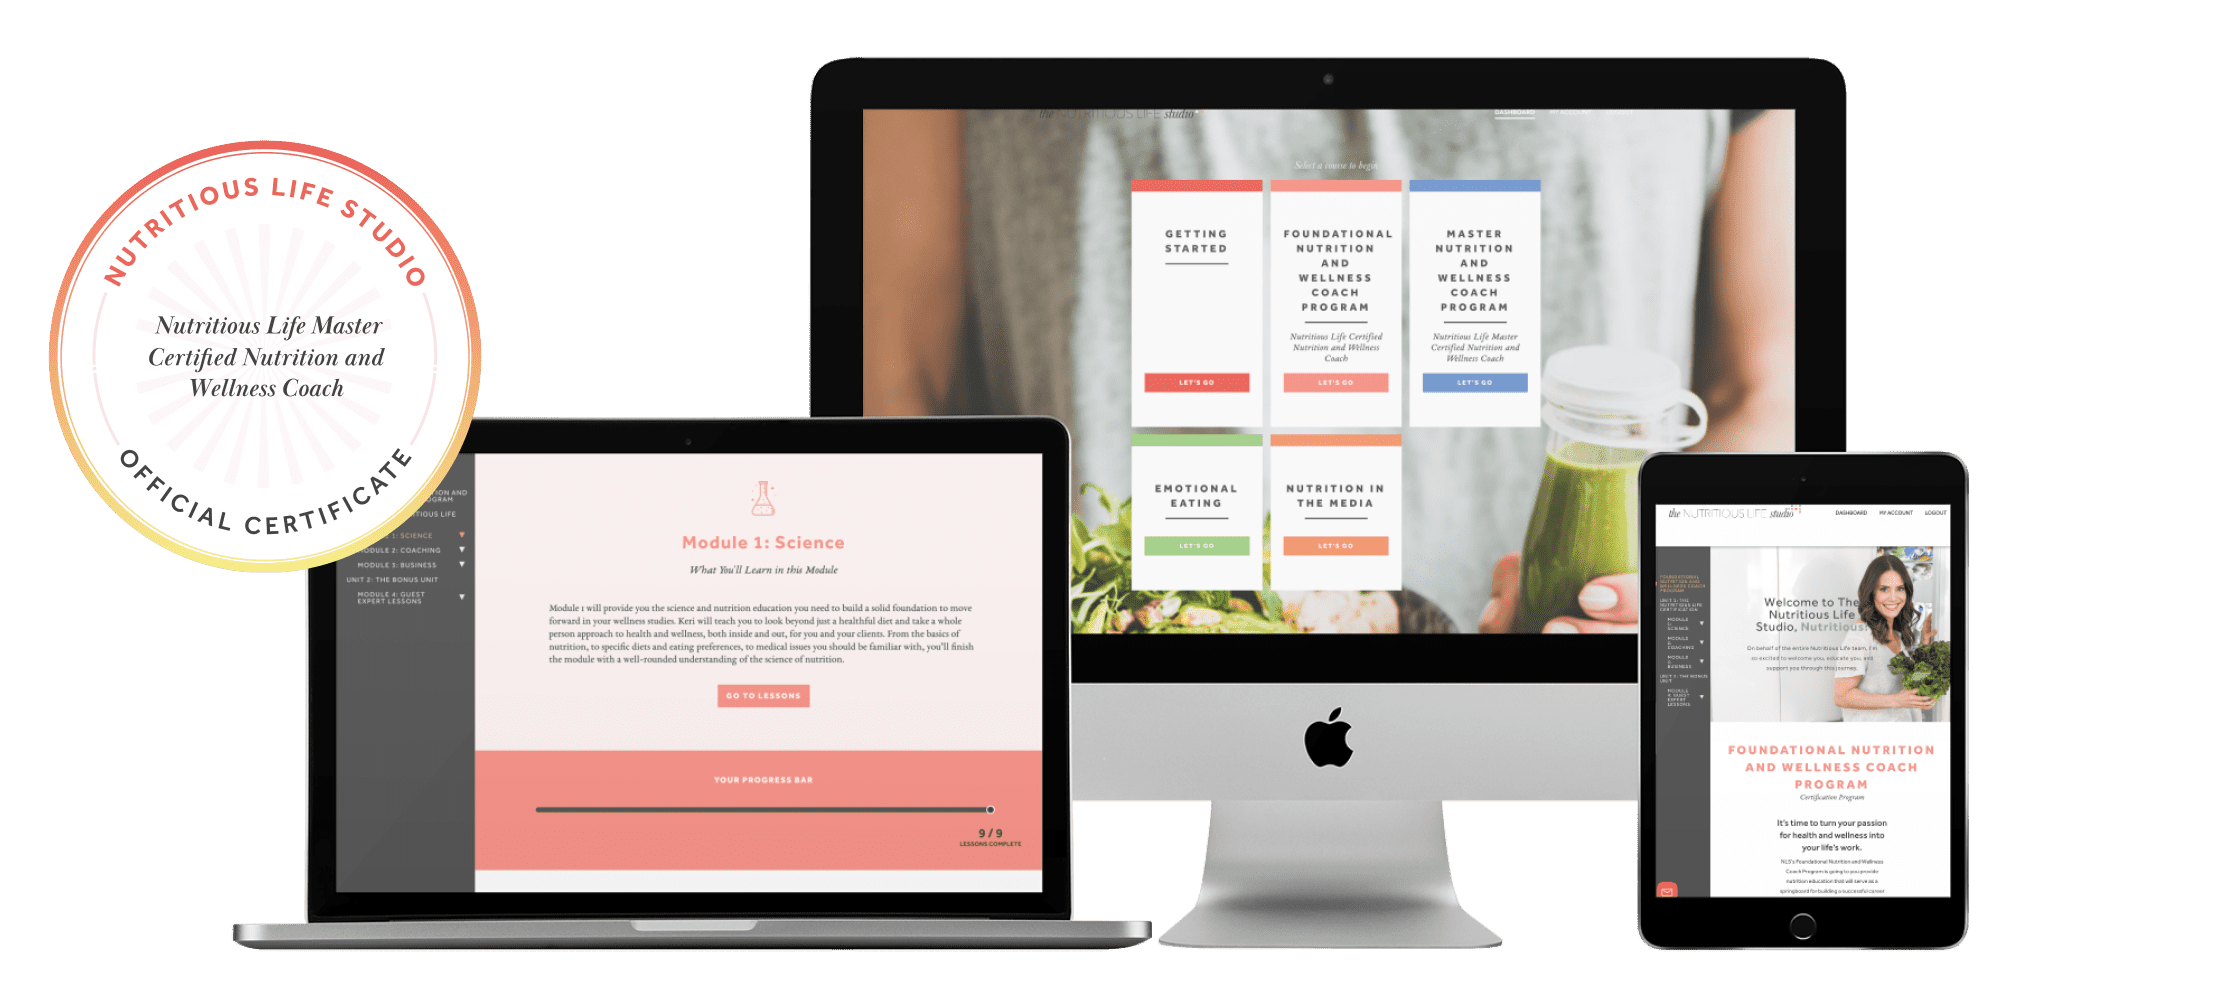 Nutritious Life - Brand strategy and web design by MOKA Creative